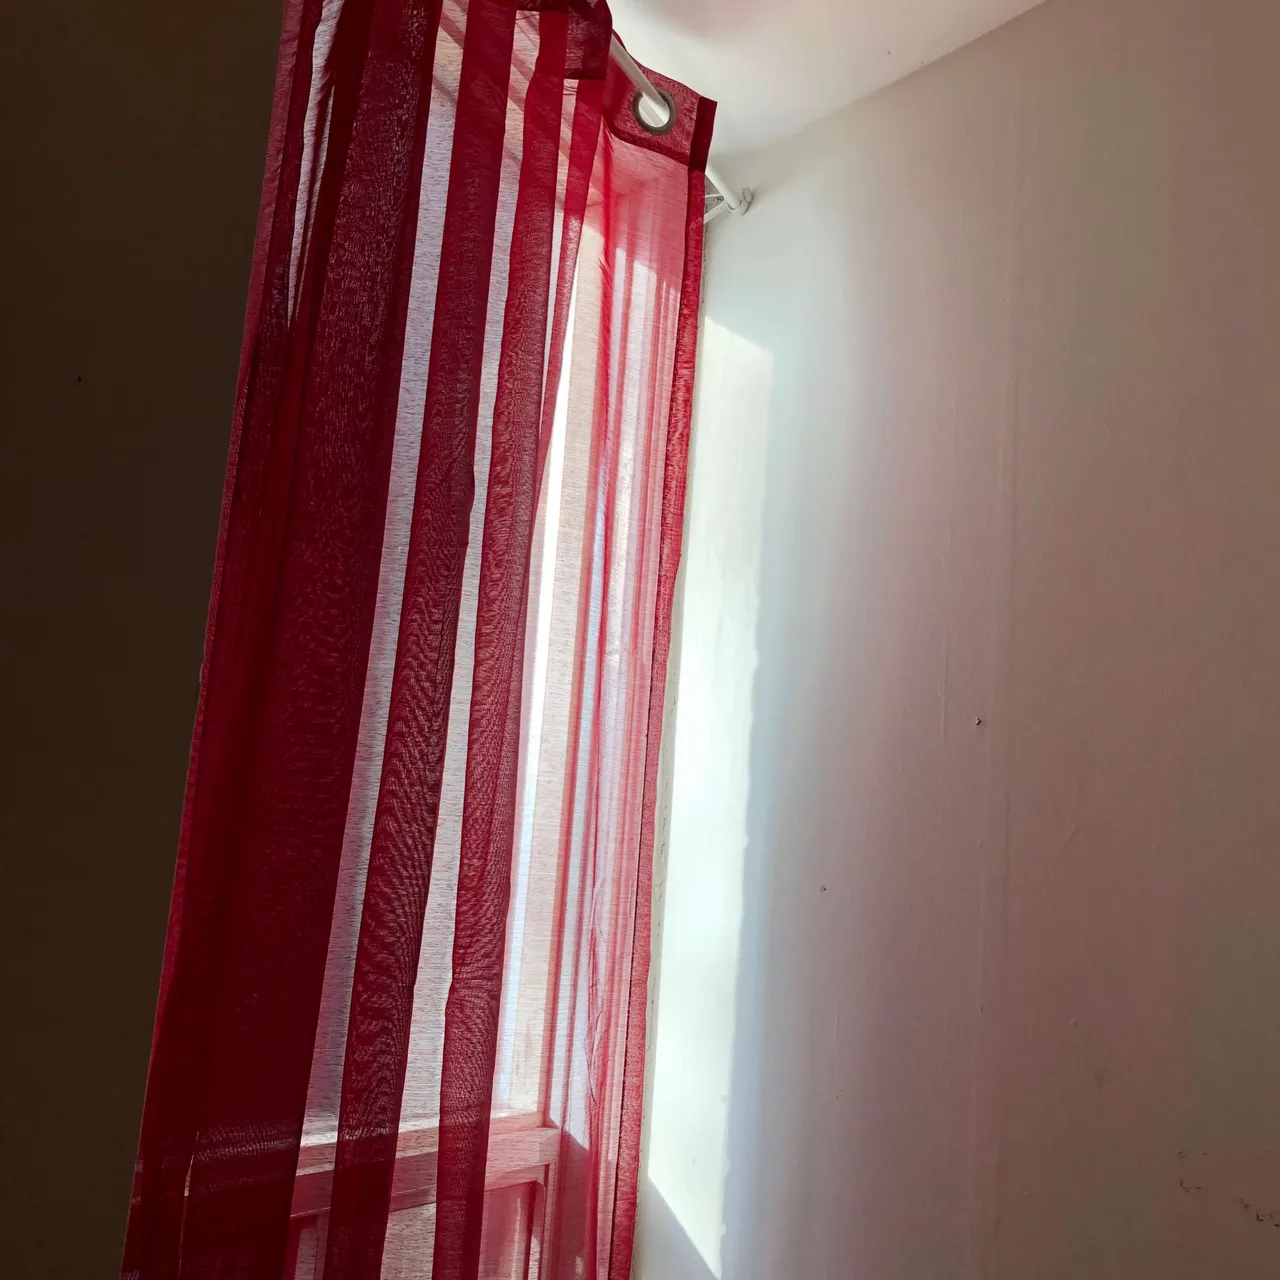 Drapes, for when it is time for some privacy... photo 1